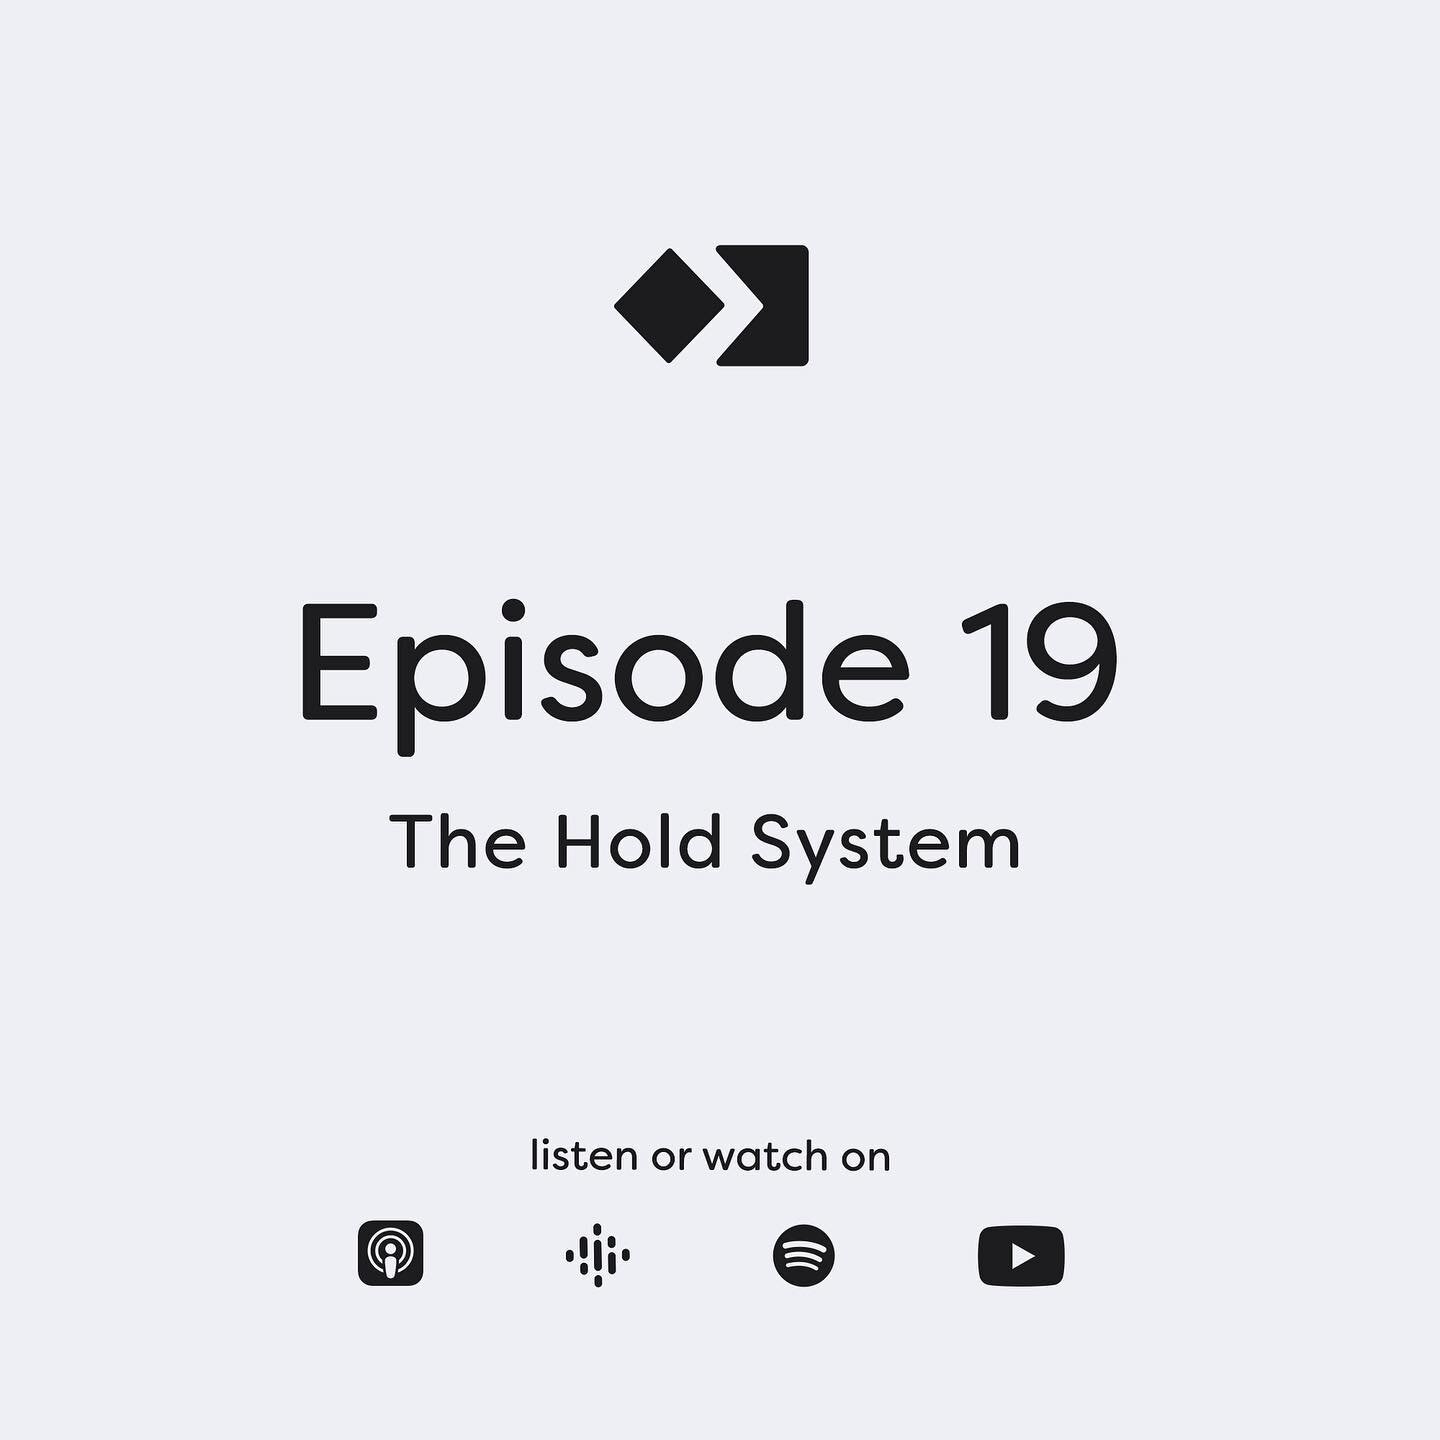 The hold system allows the design motion world to function in relative order. It helps manage the moving puzzles and enables us to plan. It benefits both worlds: studios and freelancers. 

Listen to our new episode where we talk about it from both pe